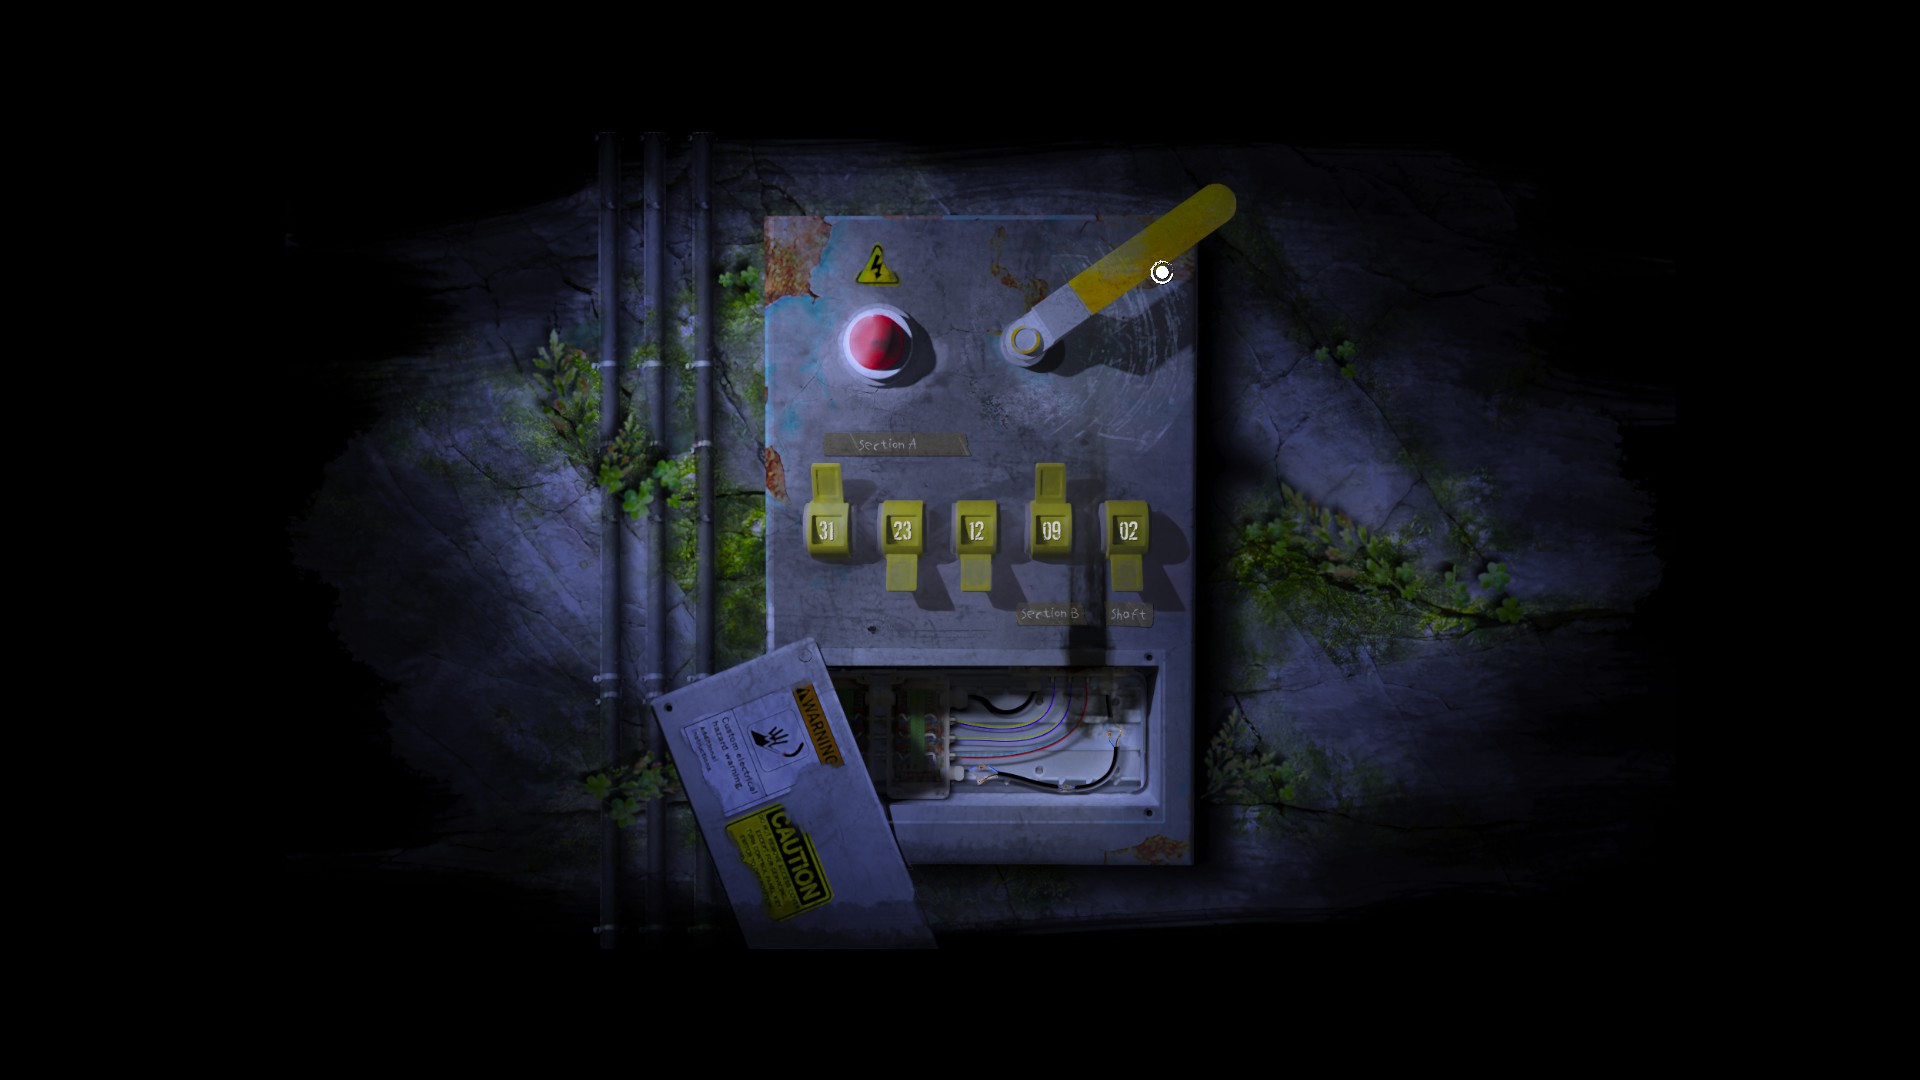 The Night is Grey Walkthrough and Solutions to Puzzles